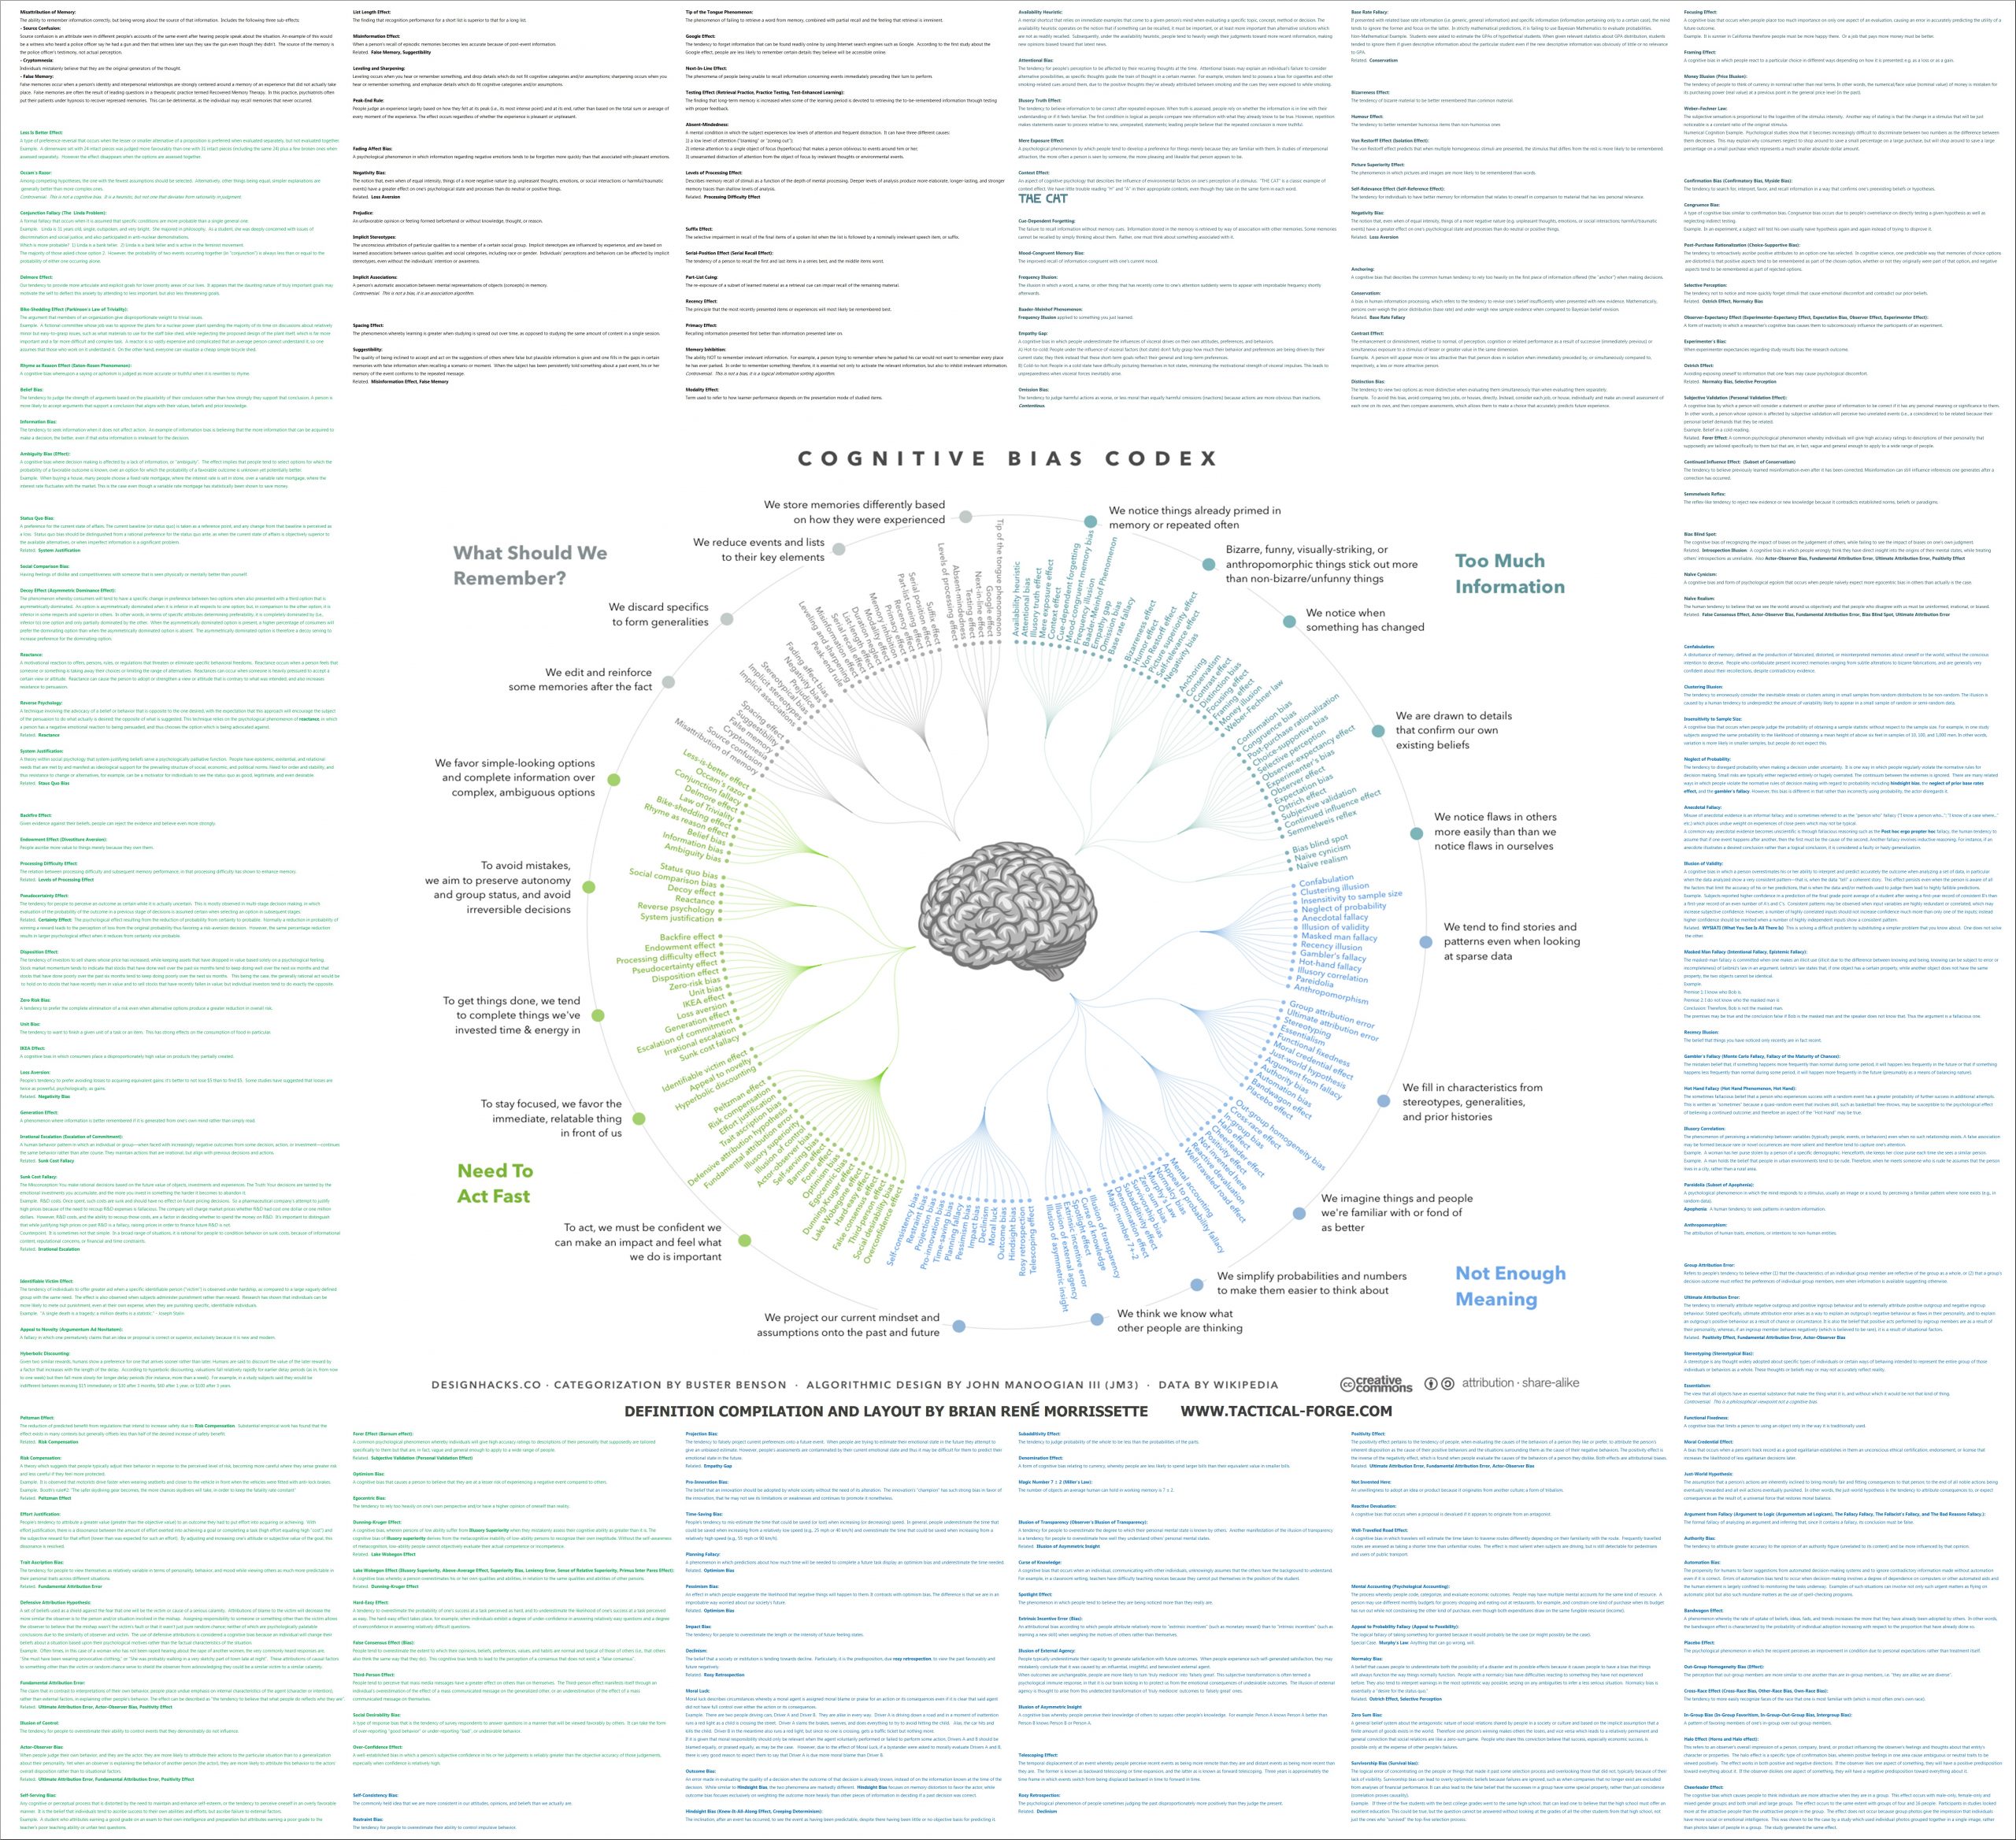 Cognitive_Bias_Codex_With_Definitions,_an_Extension_of_the_work_of_John_Manoogian_by_Brian_Morrissette